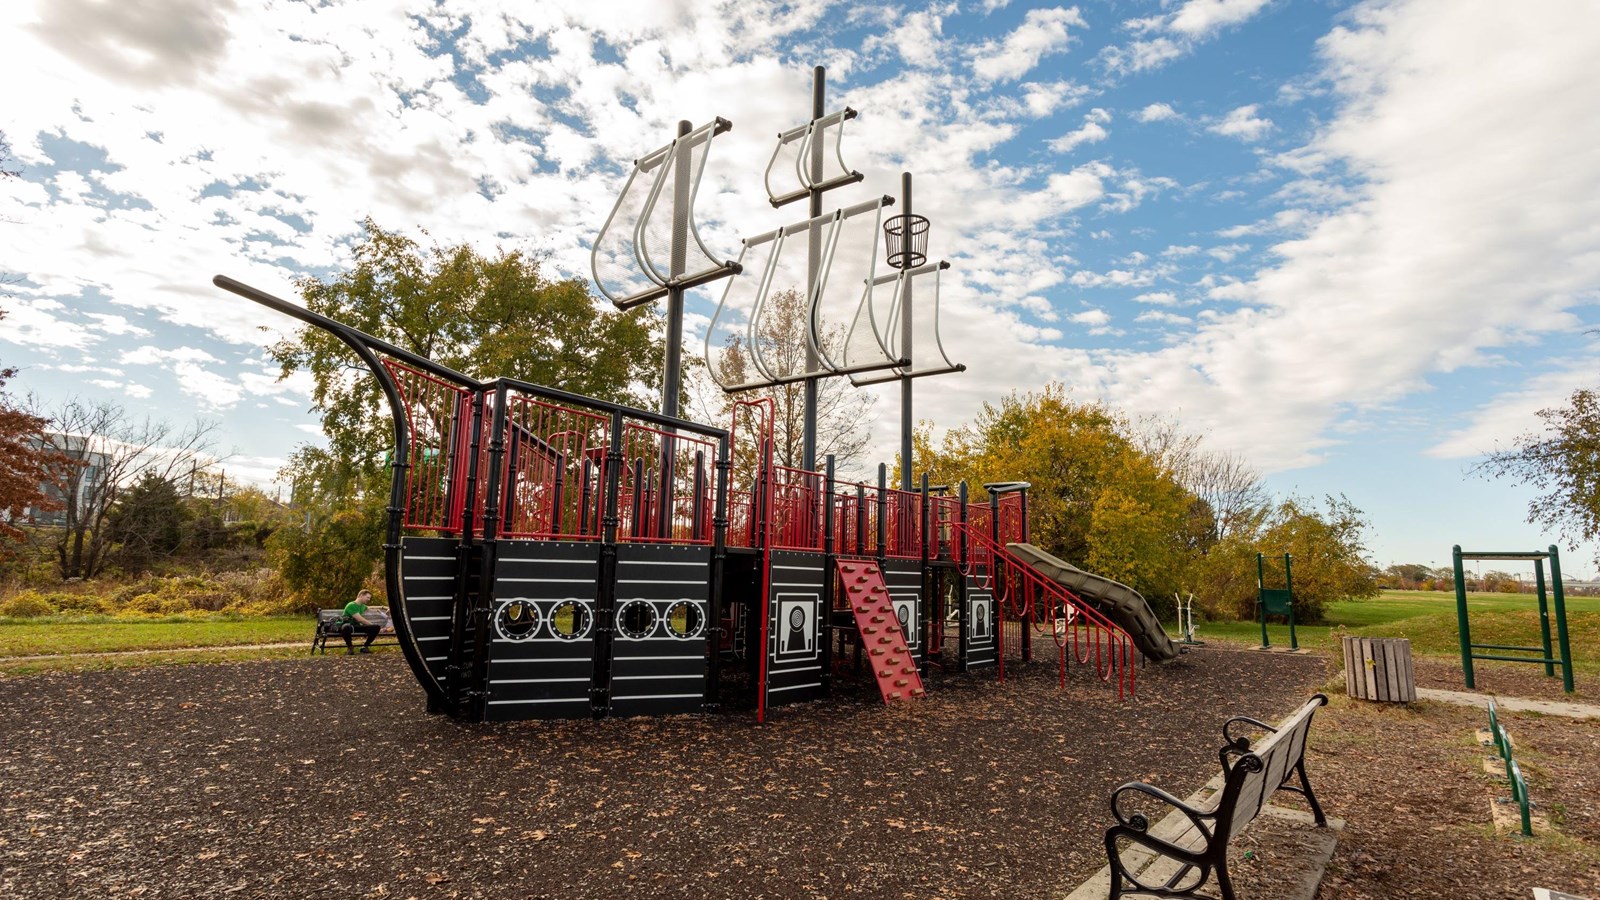 Playground that looks like a pirate ship